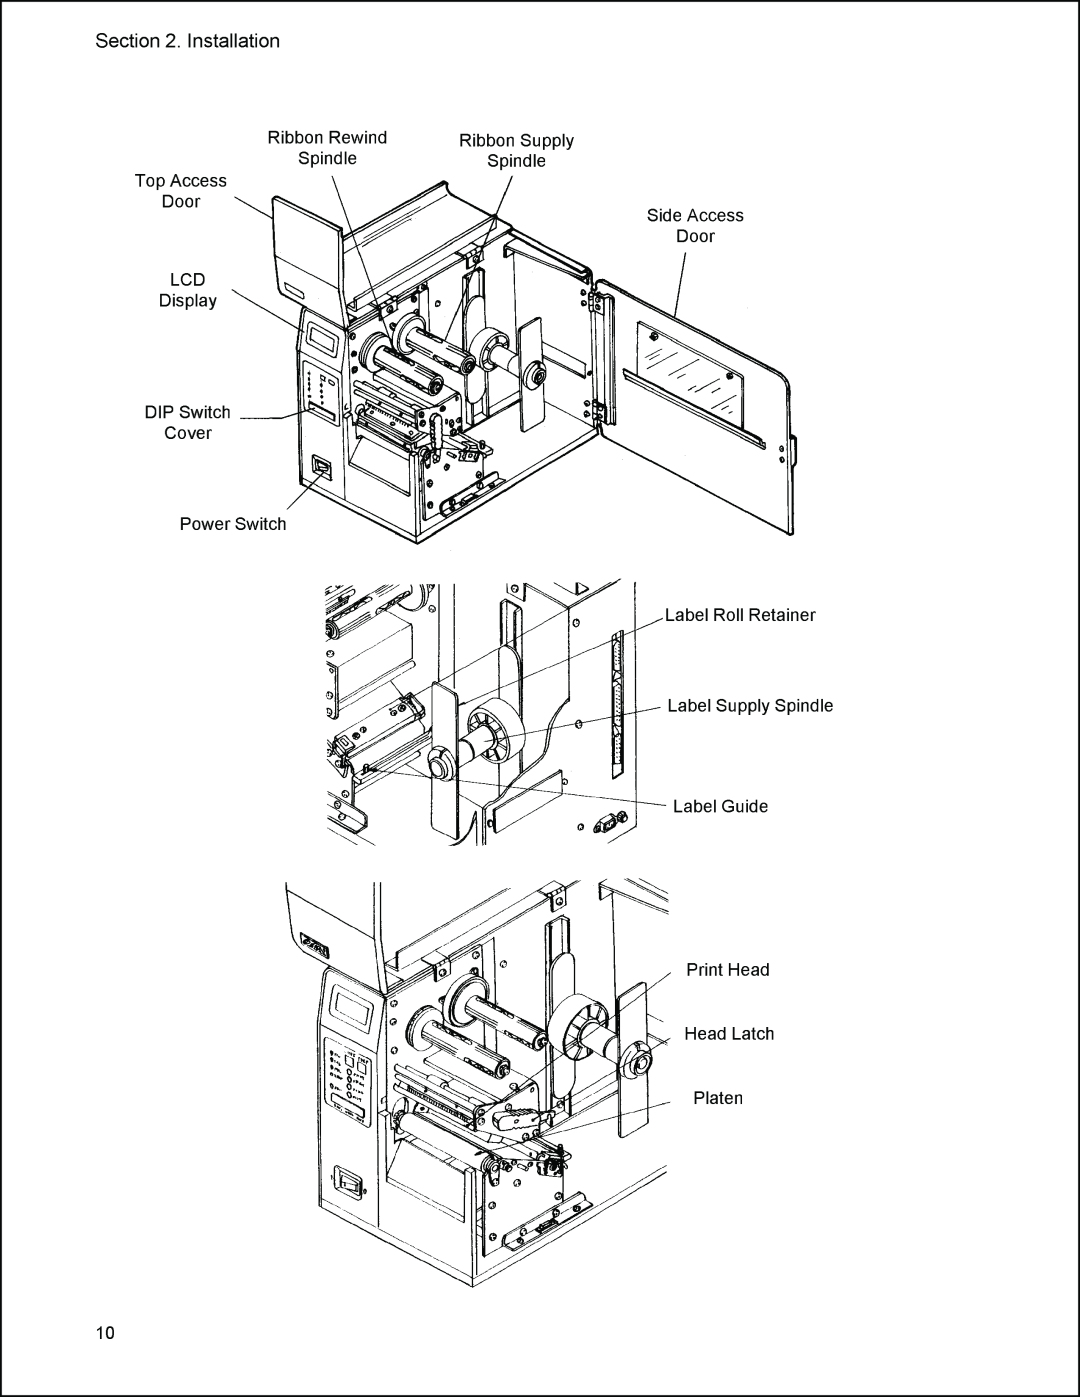 Panduit PTR3E manual TopAccess, Door, Platen, RibbonSpindleRewind, SideAccess, Switch, RibbonSpindleSupply, CoverPower 